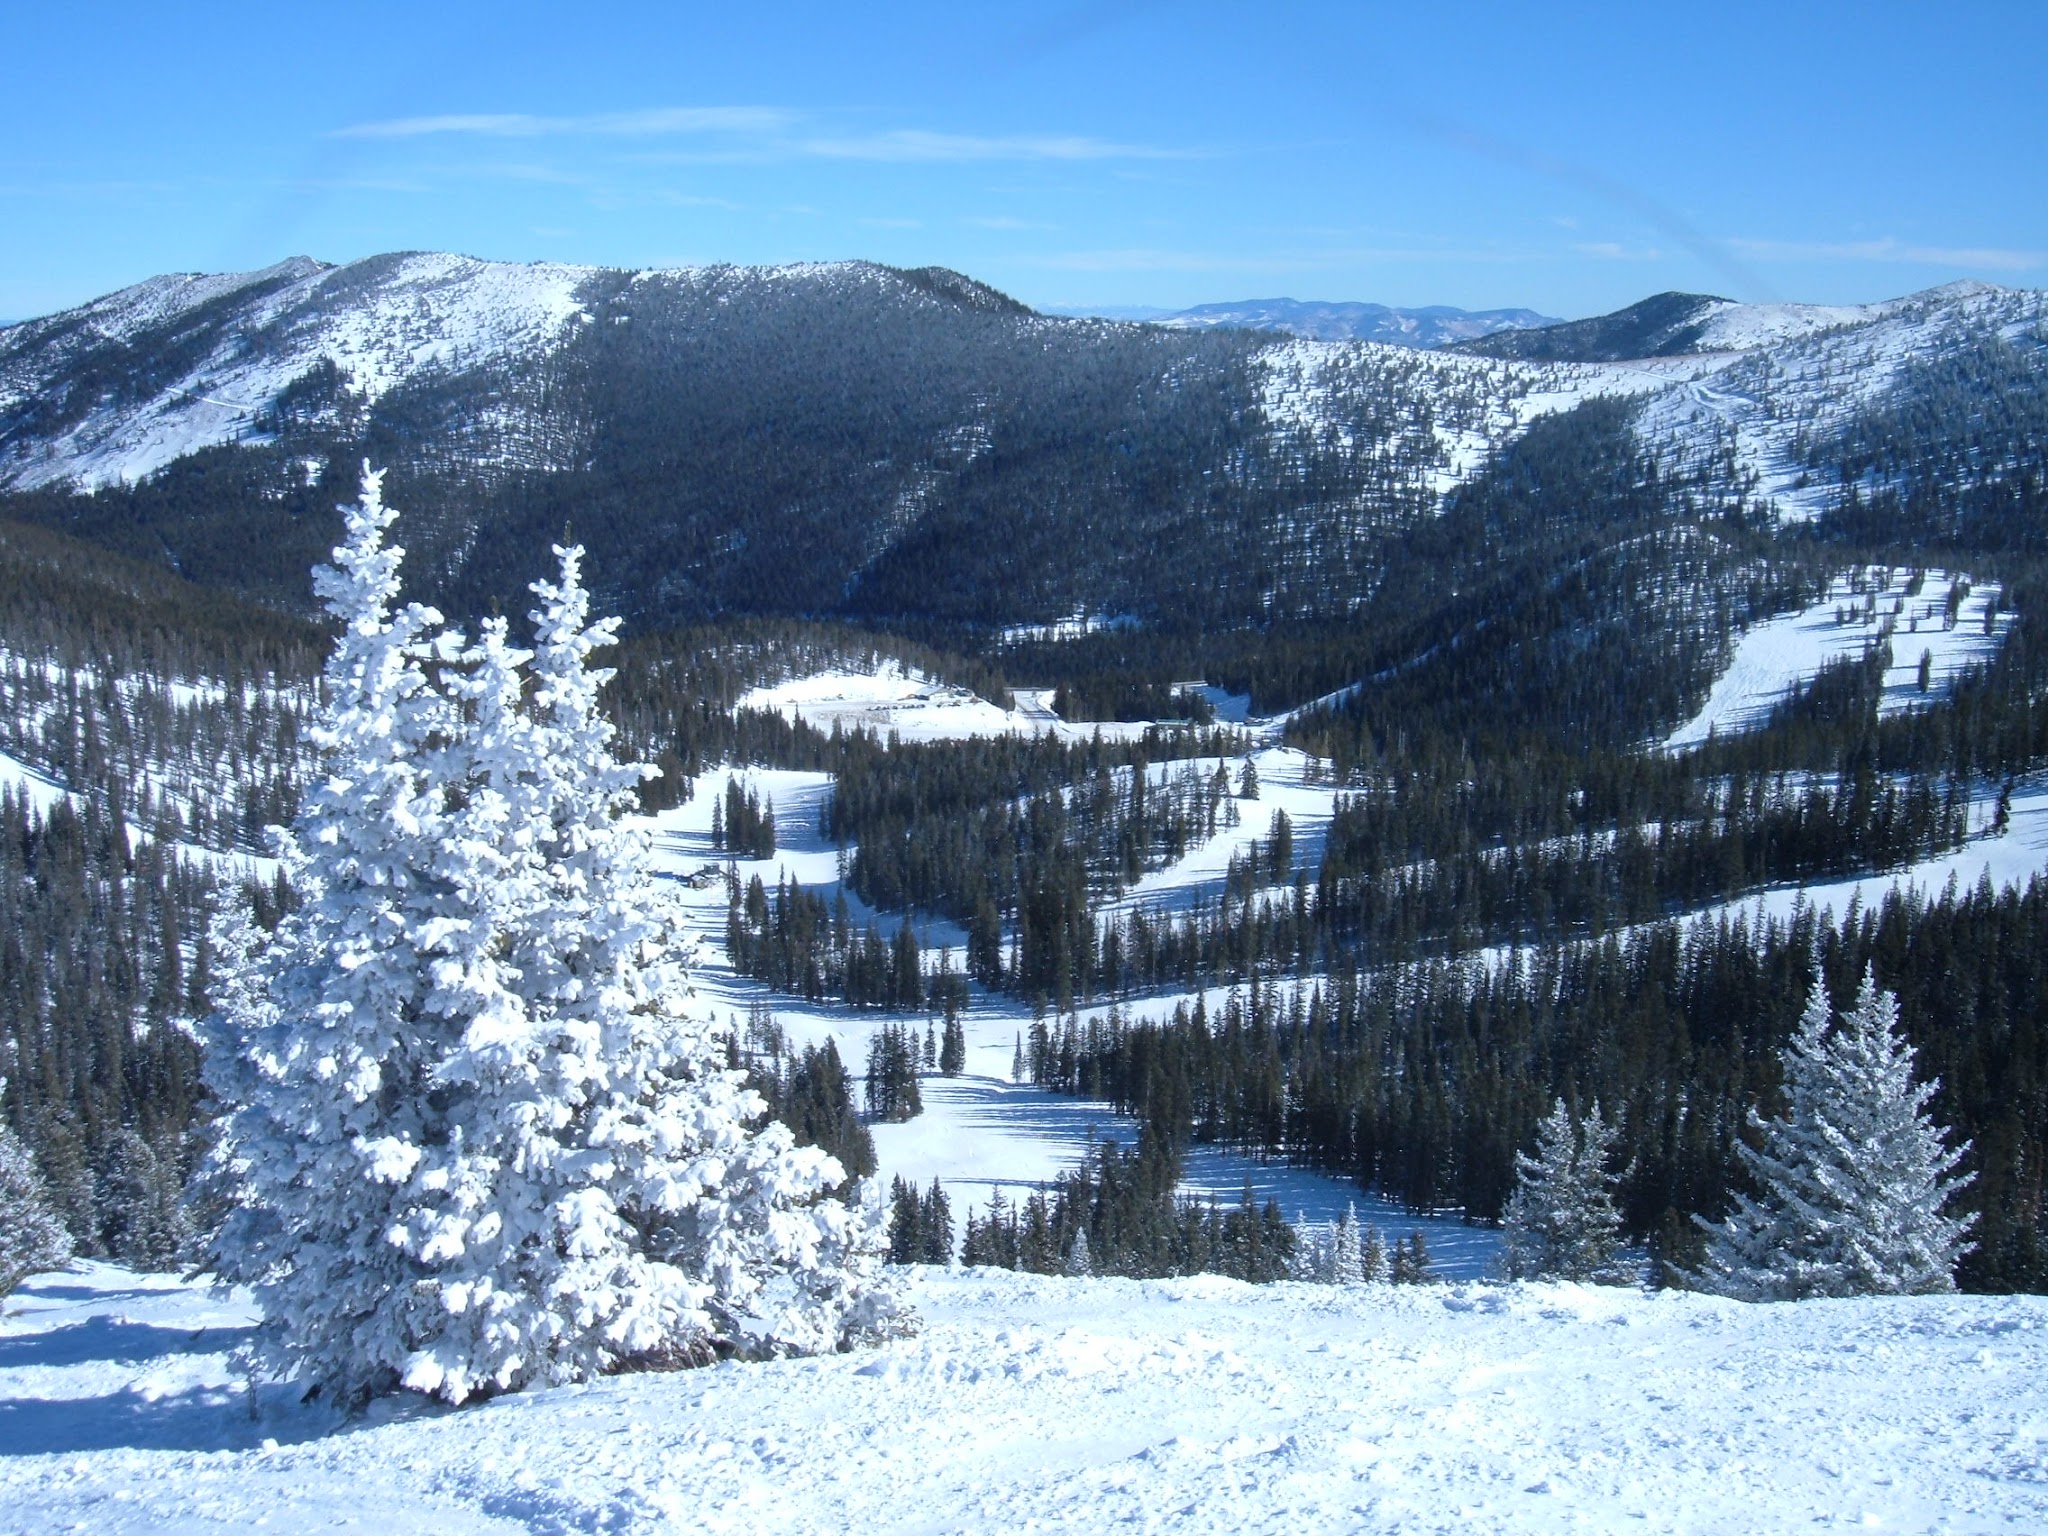 View of a ski mountain on a winter day.